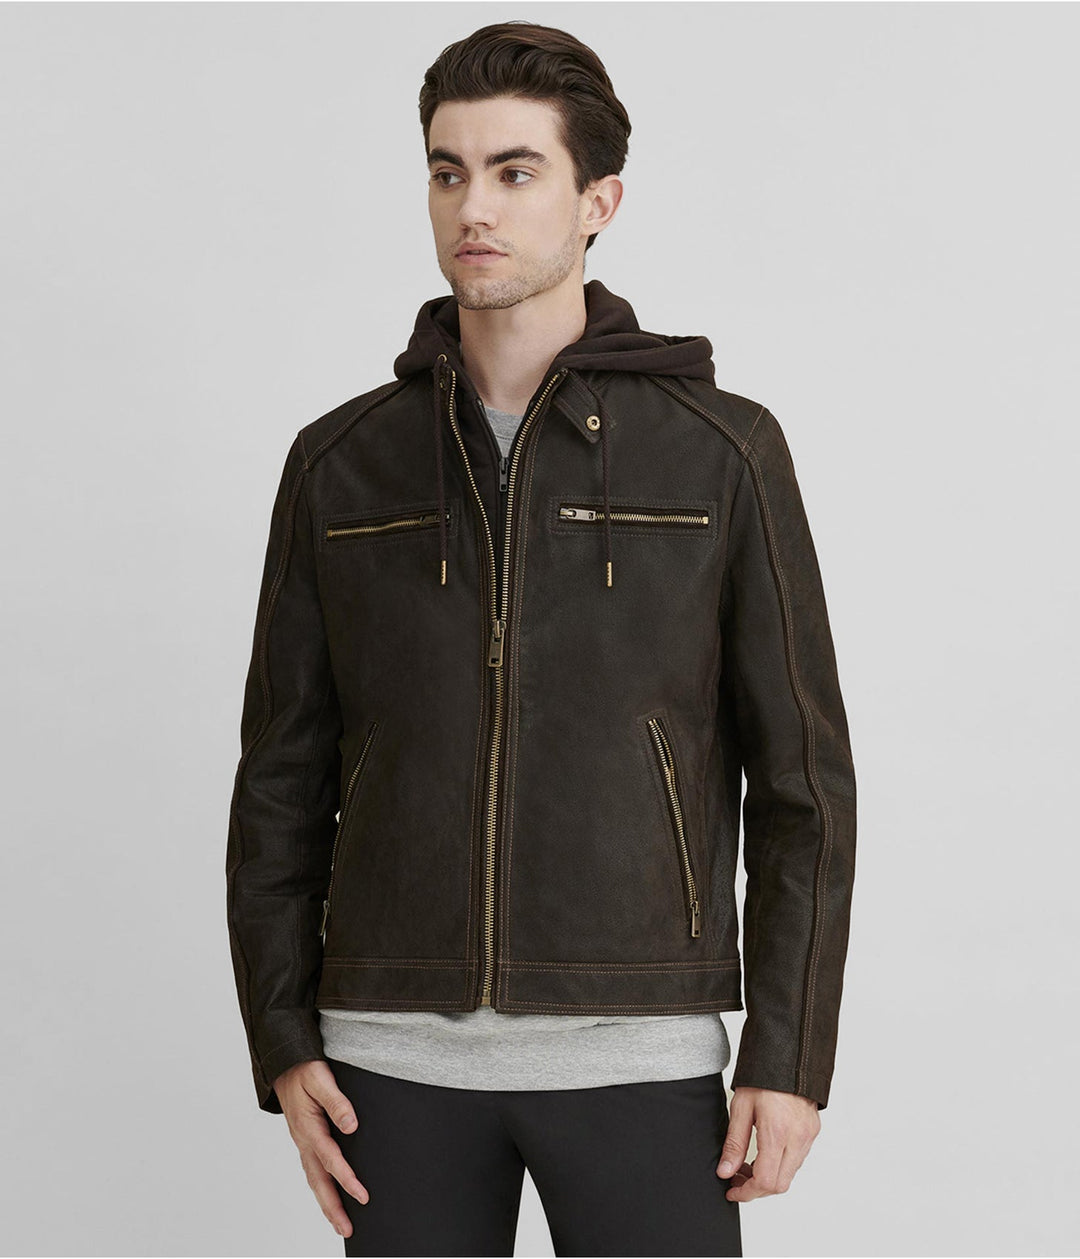 Get Ready For The Ride: The Cafe Racer Leather Jacket As A Fashion Icon